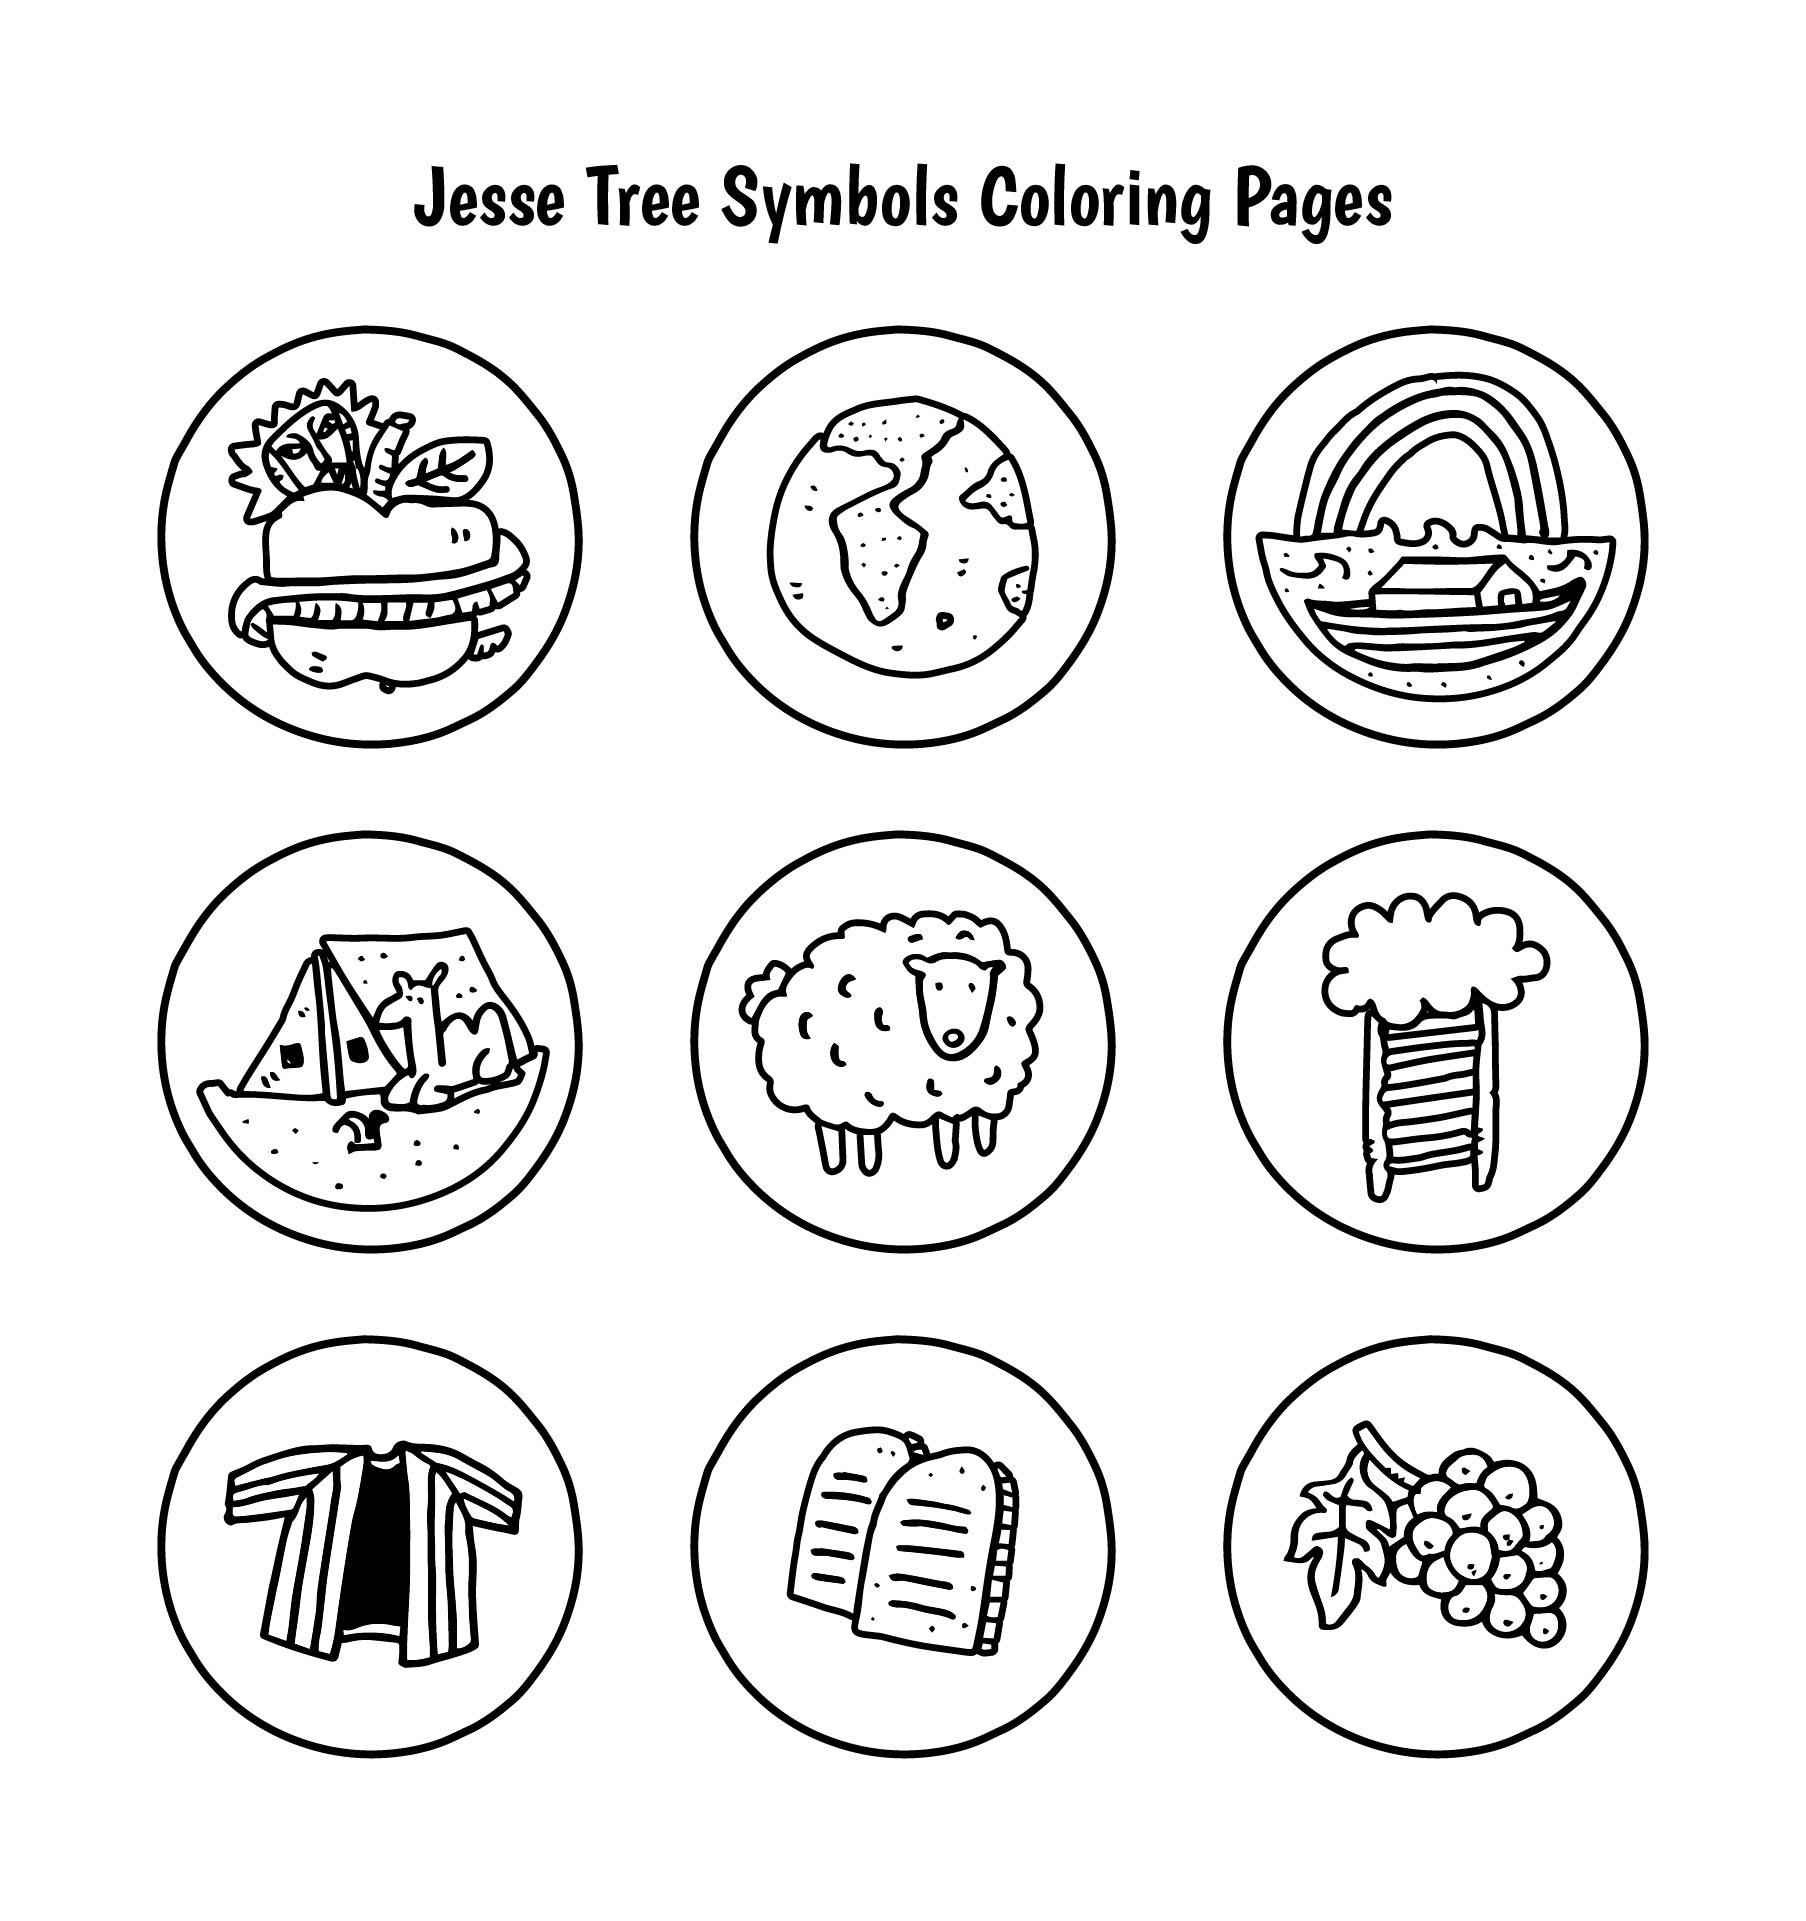 Printable Jesse Tree Symbols And Meanings